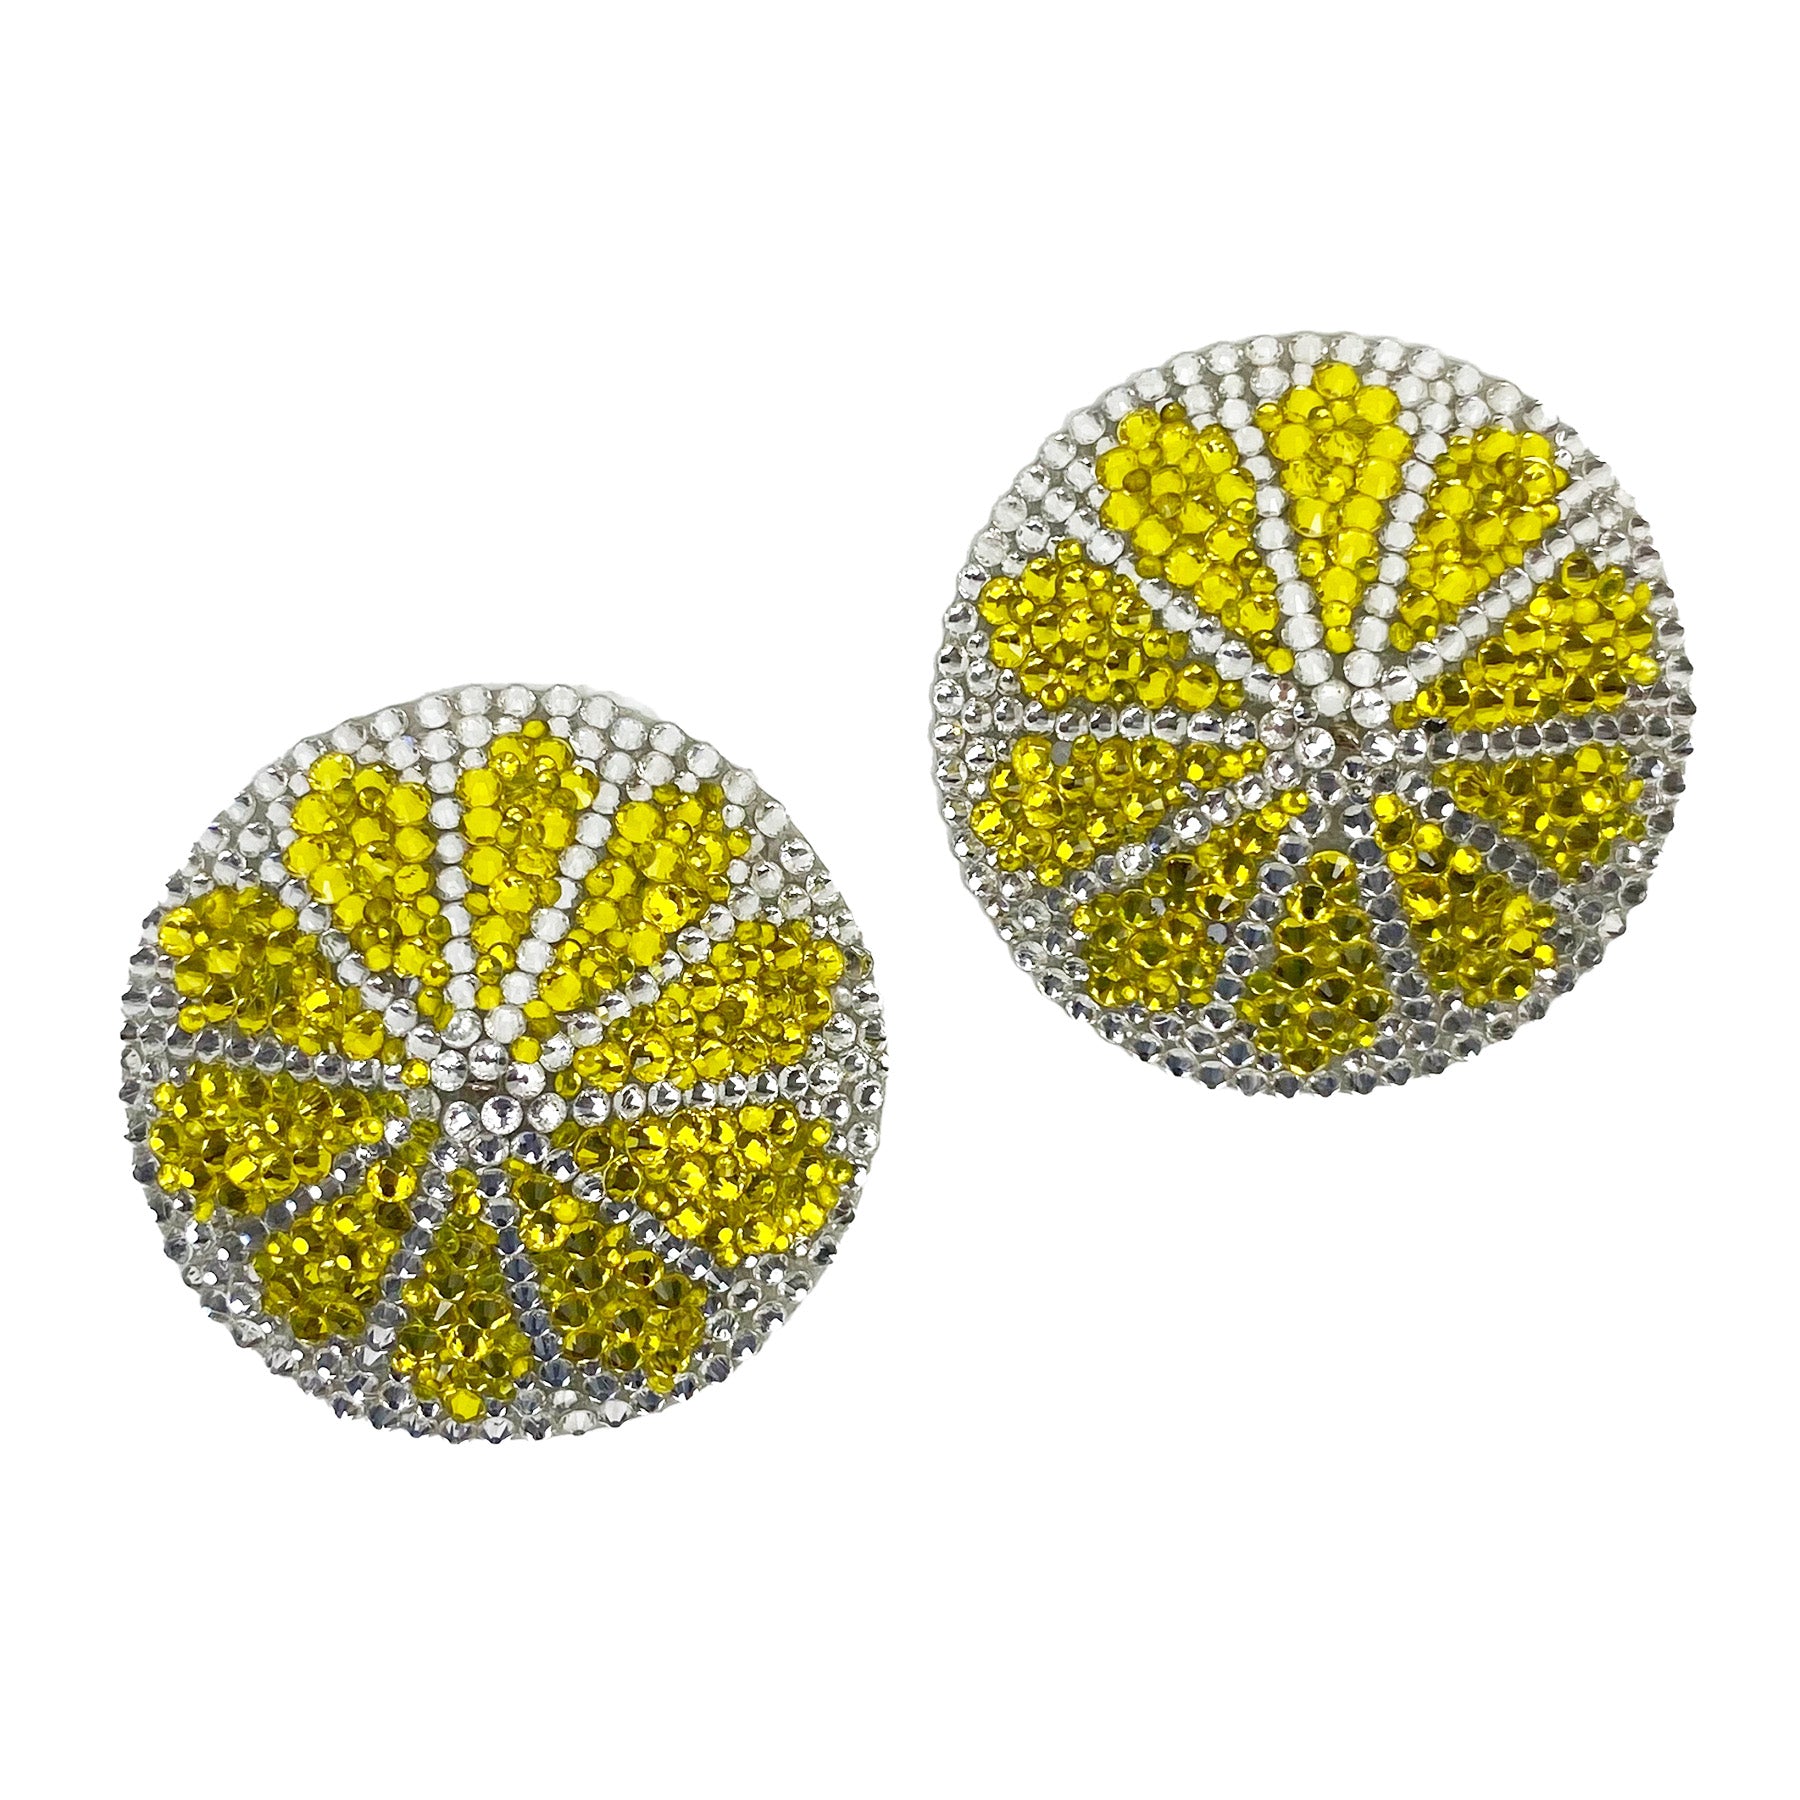 yellow and crystal lemon pasties, burlesque costume, 3d printed, crystals